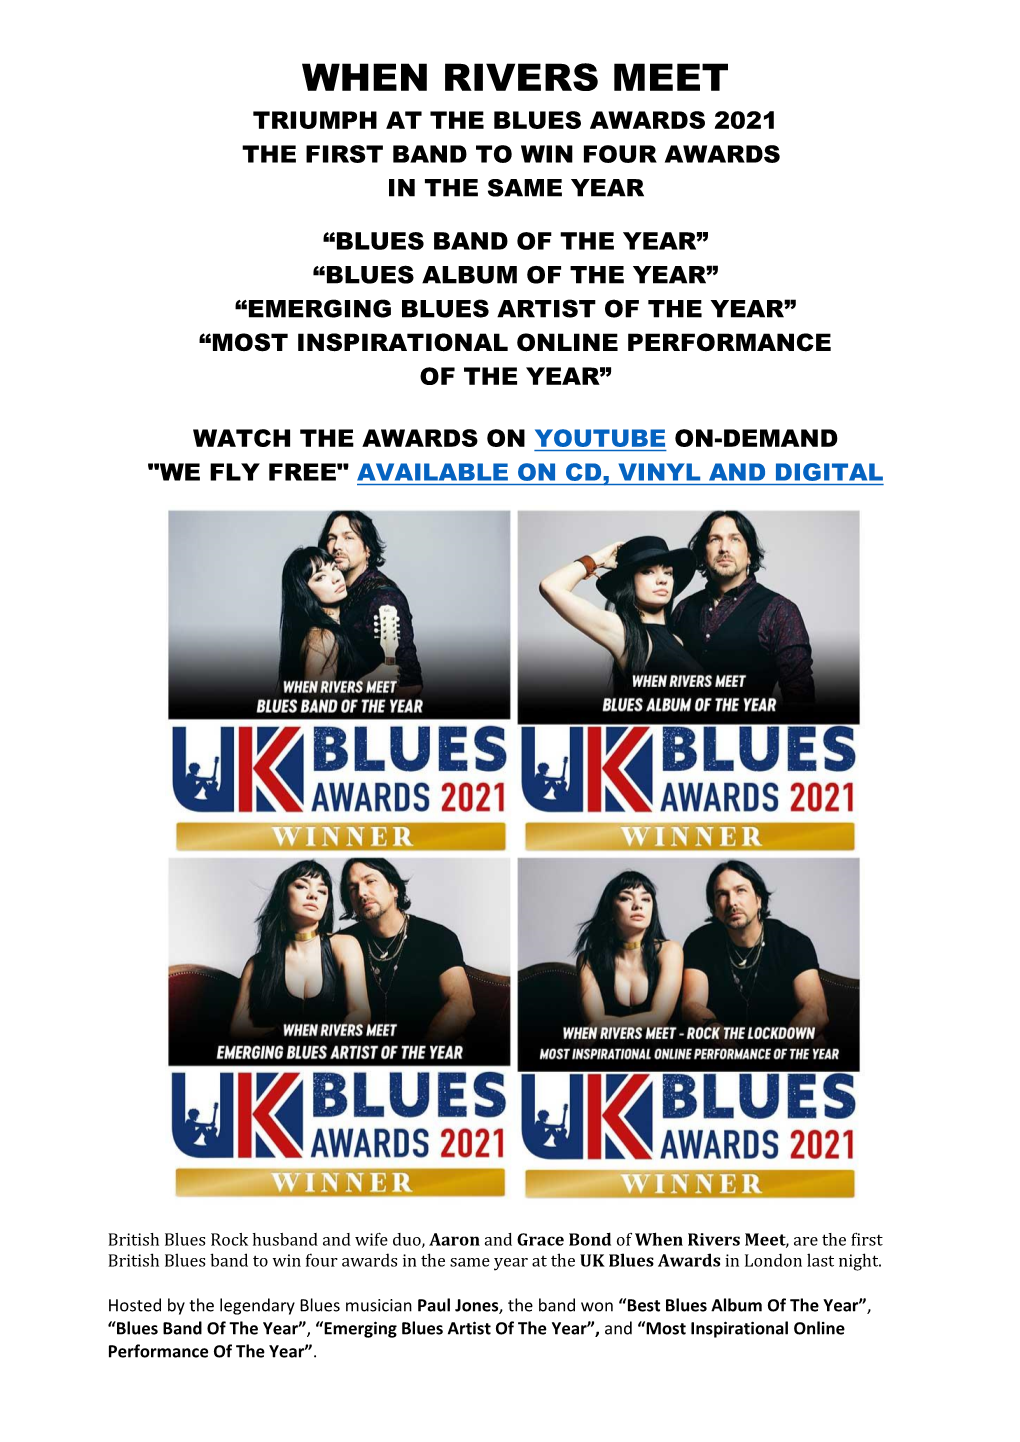 When Rivers Meet Triumph at the Blues Awards 2021 the First Band to Win Four Awards in the Same Year